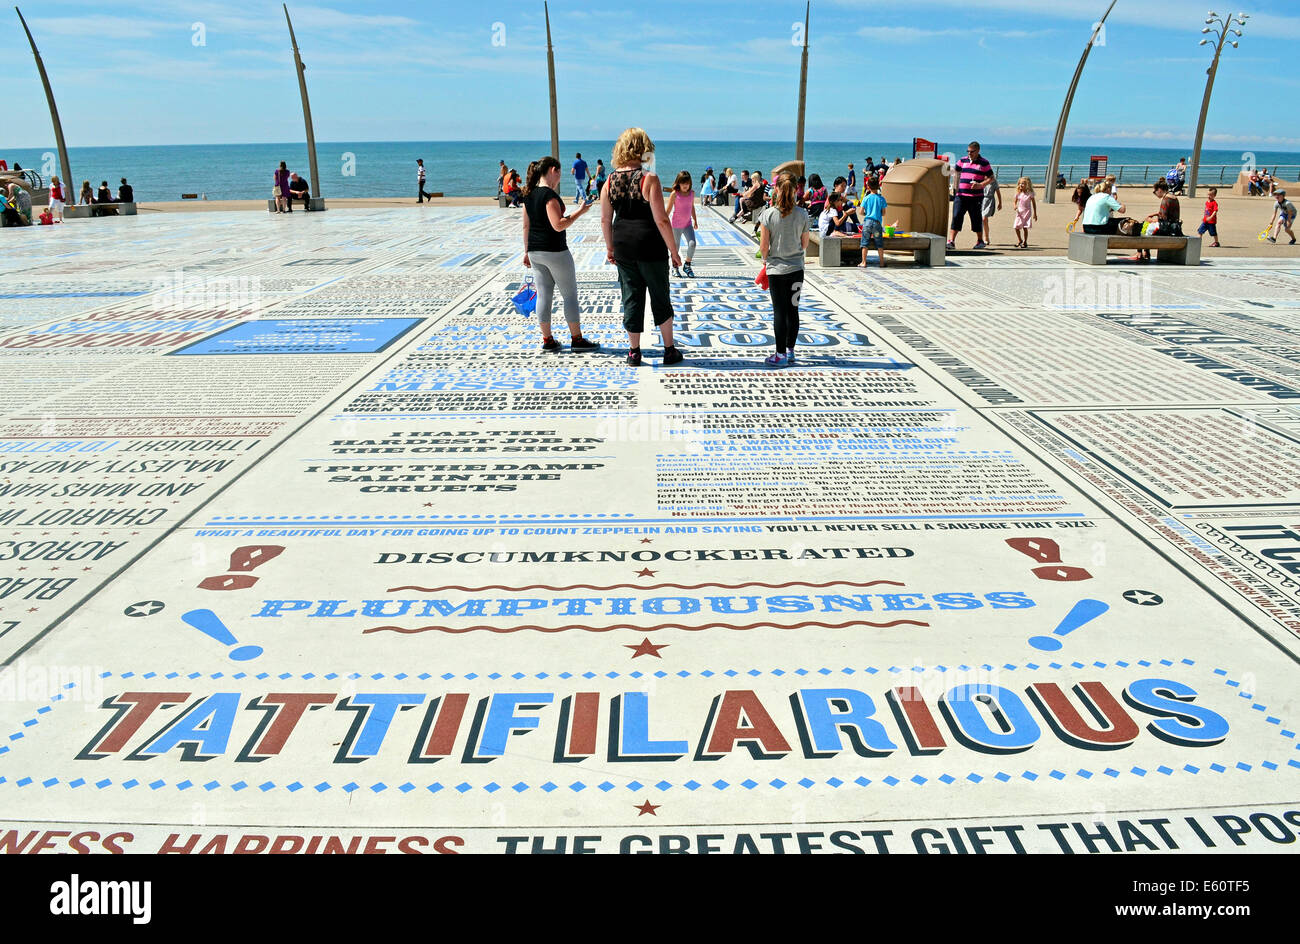 The comedy carpet on the seafront promenade in Blacpool, Lancashire, England, UK Stock Photo